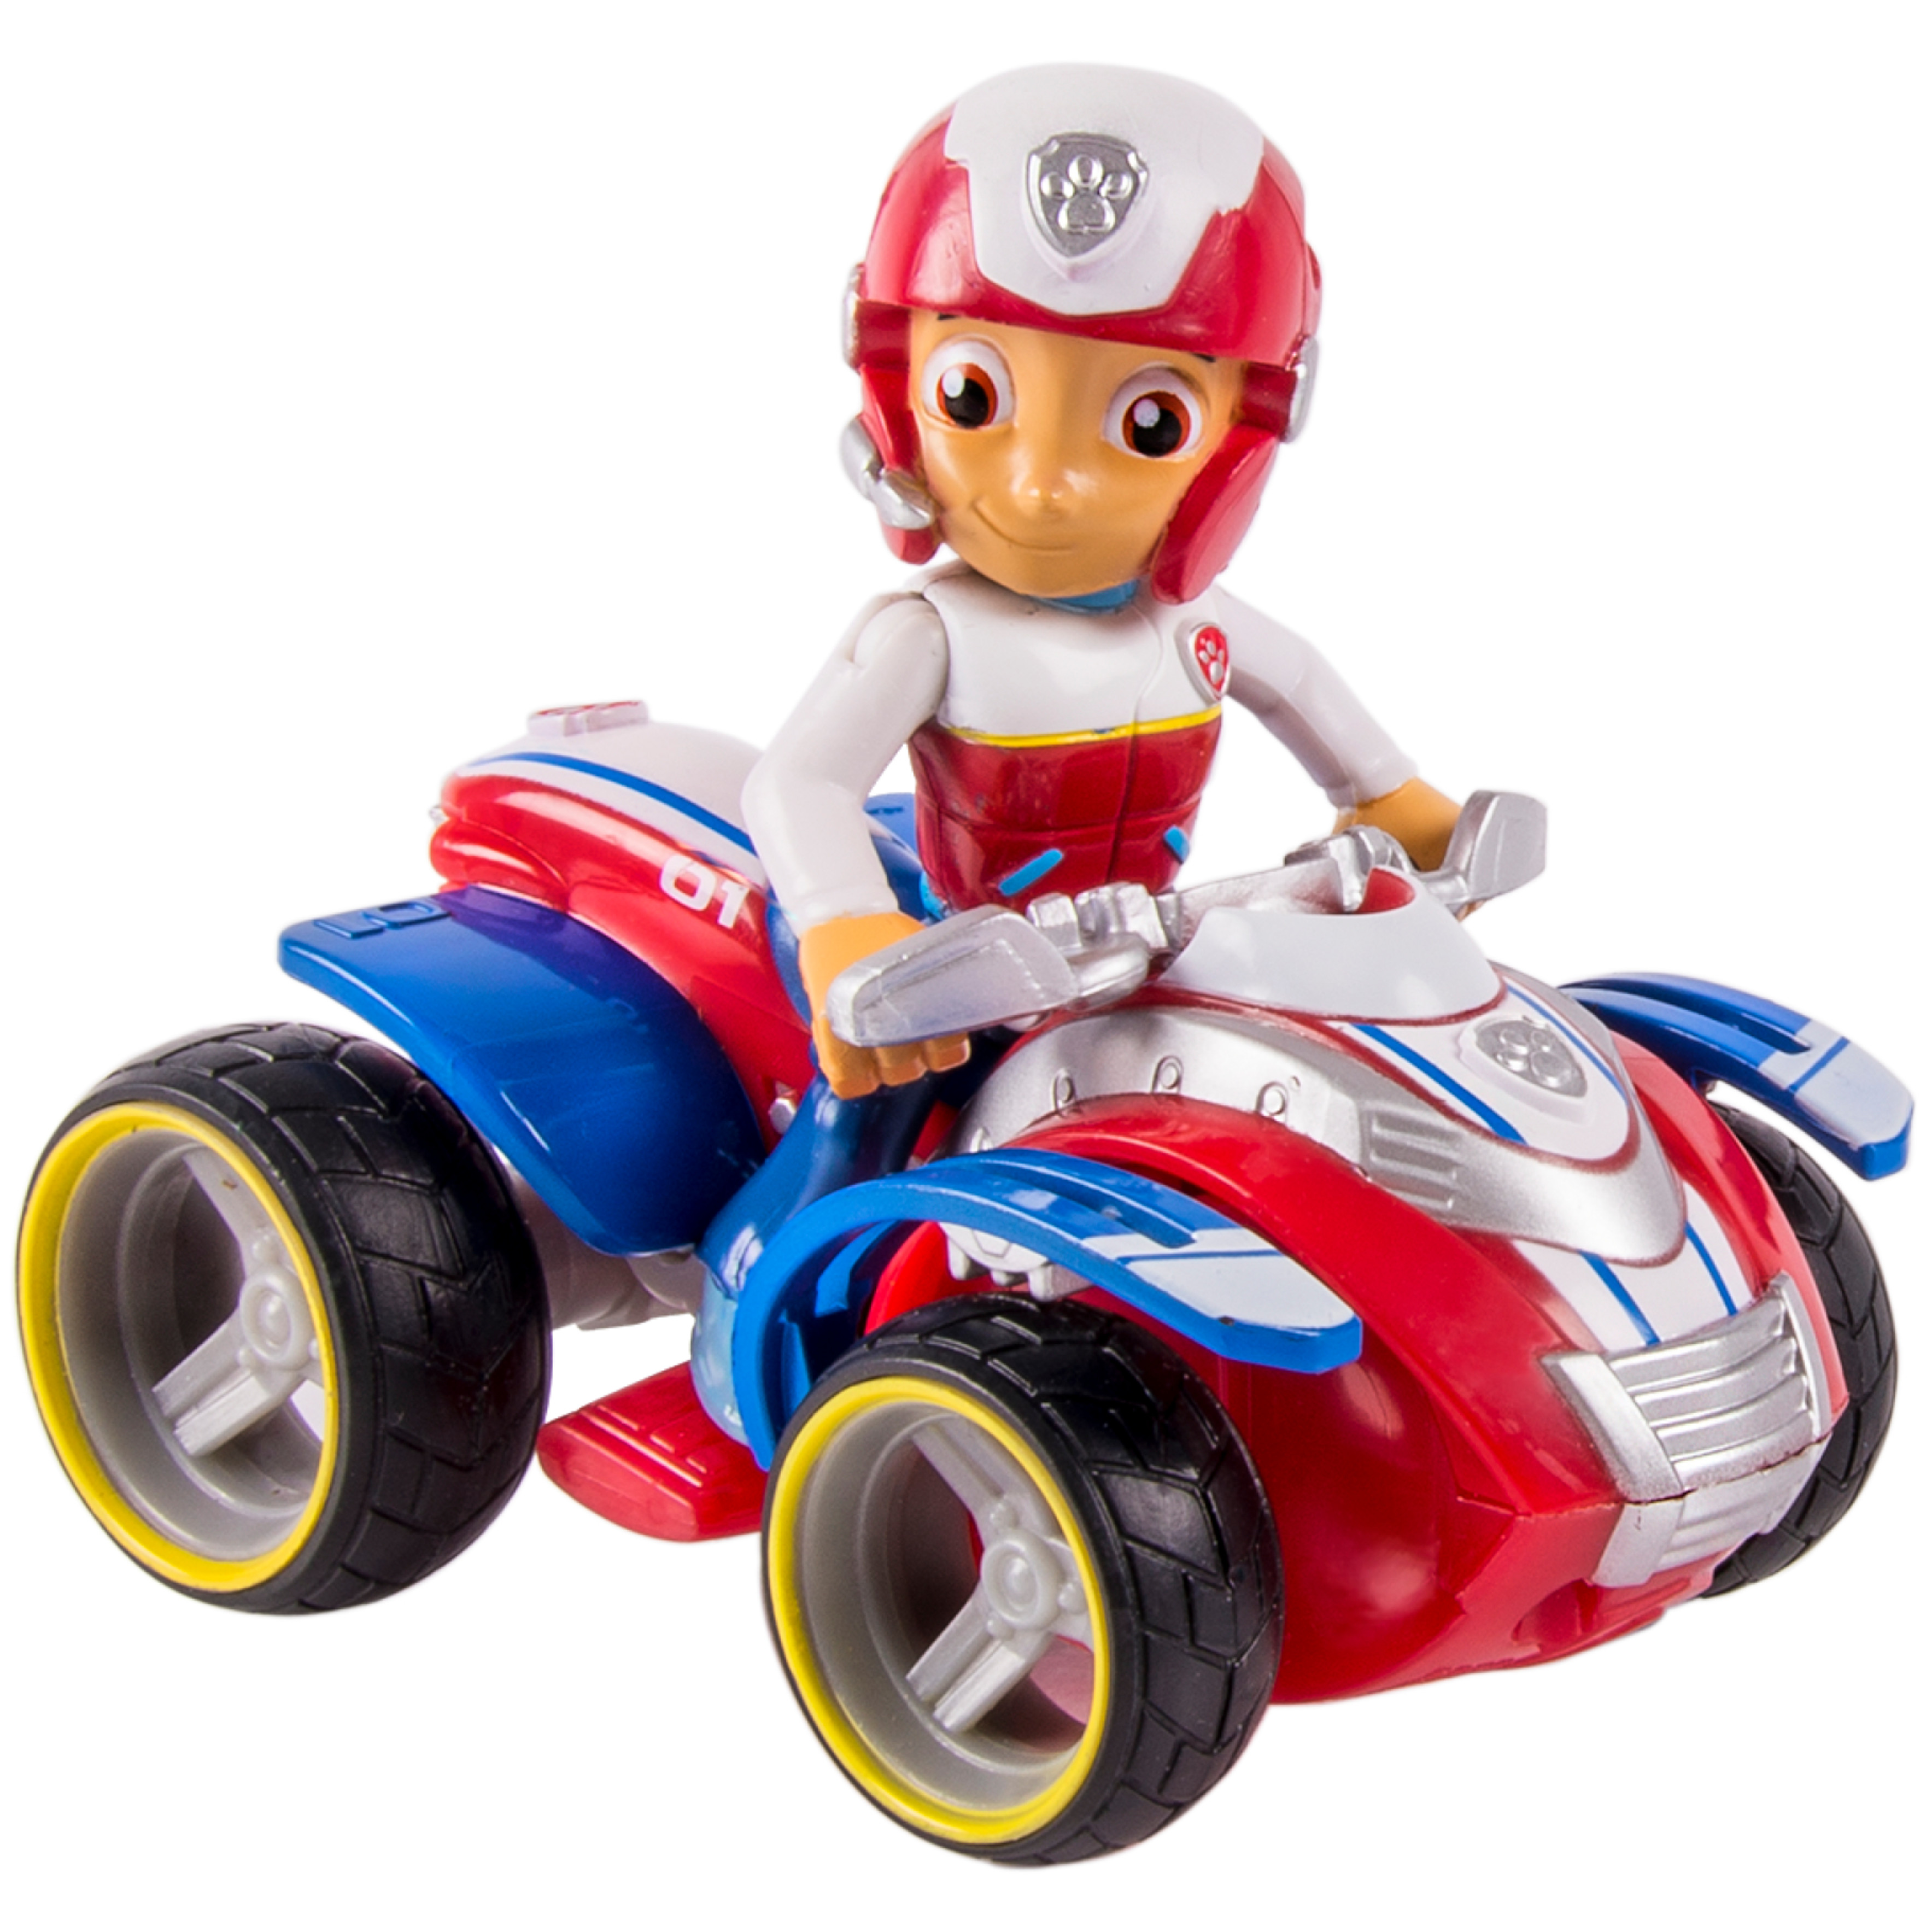 PAW Patrol Ryder's Rescue ATV, Vehicle and Figure, For Ages 3 and up - image 4 of 6